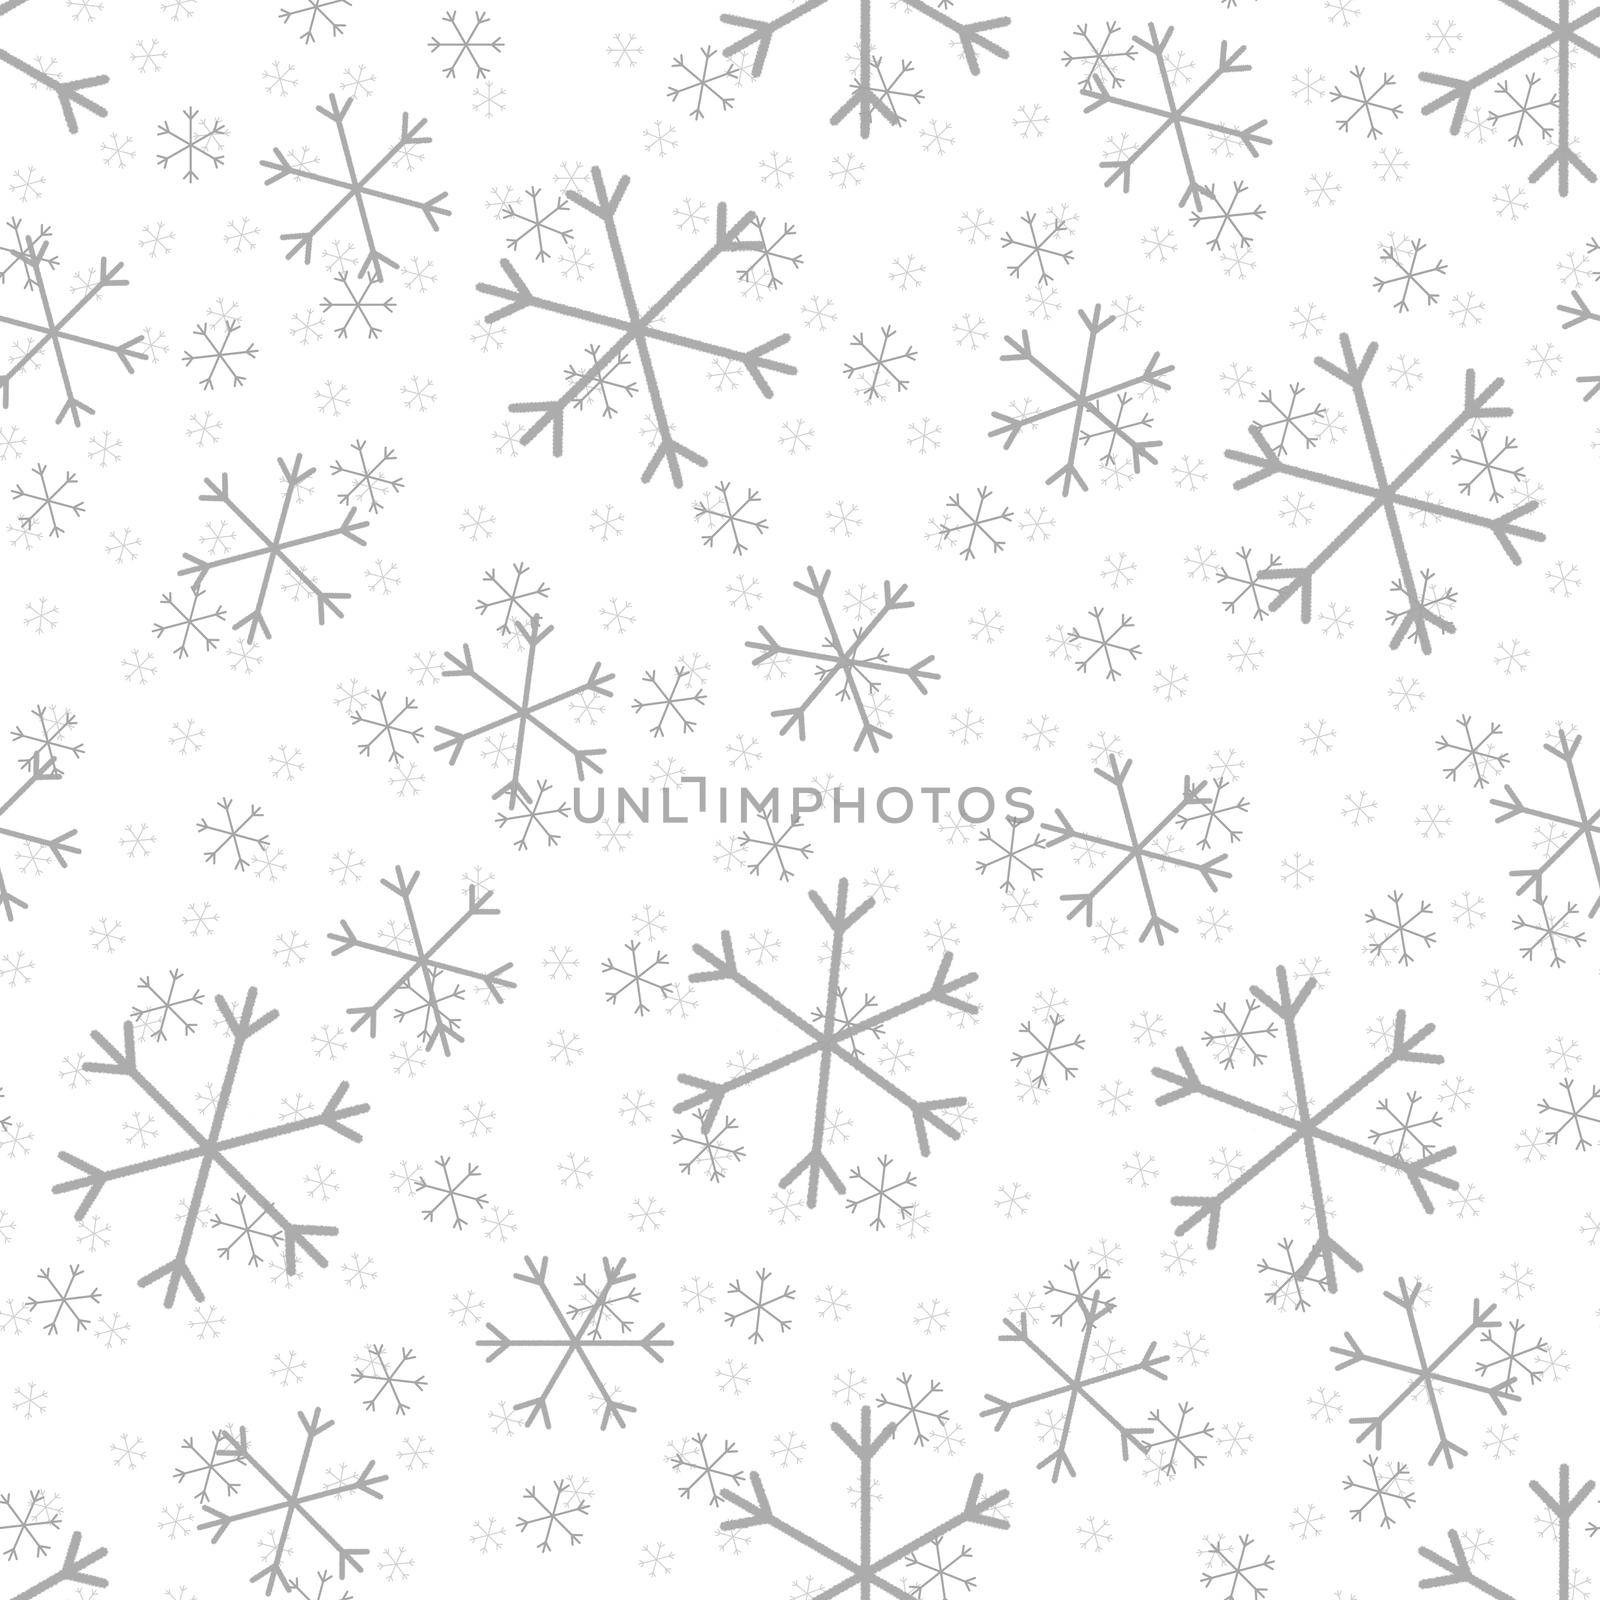 Seamless Christmas pattern doodle with hand random drawn snowflakes.Wrapping paper for presents, funny textile fabric print, design, decor, food wrap, backgrounds. new year.Raster copy.White gray